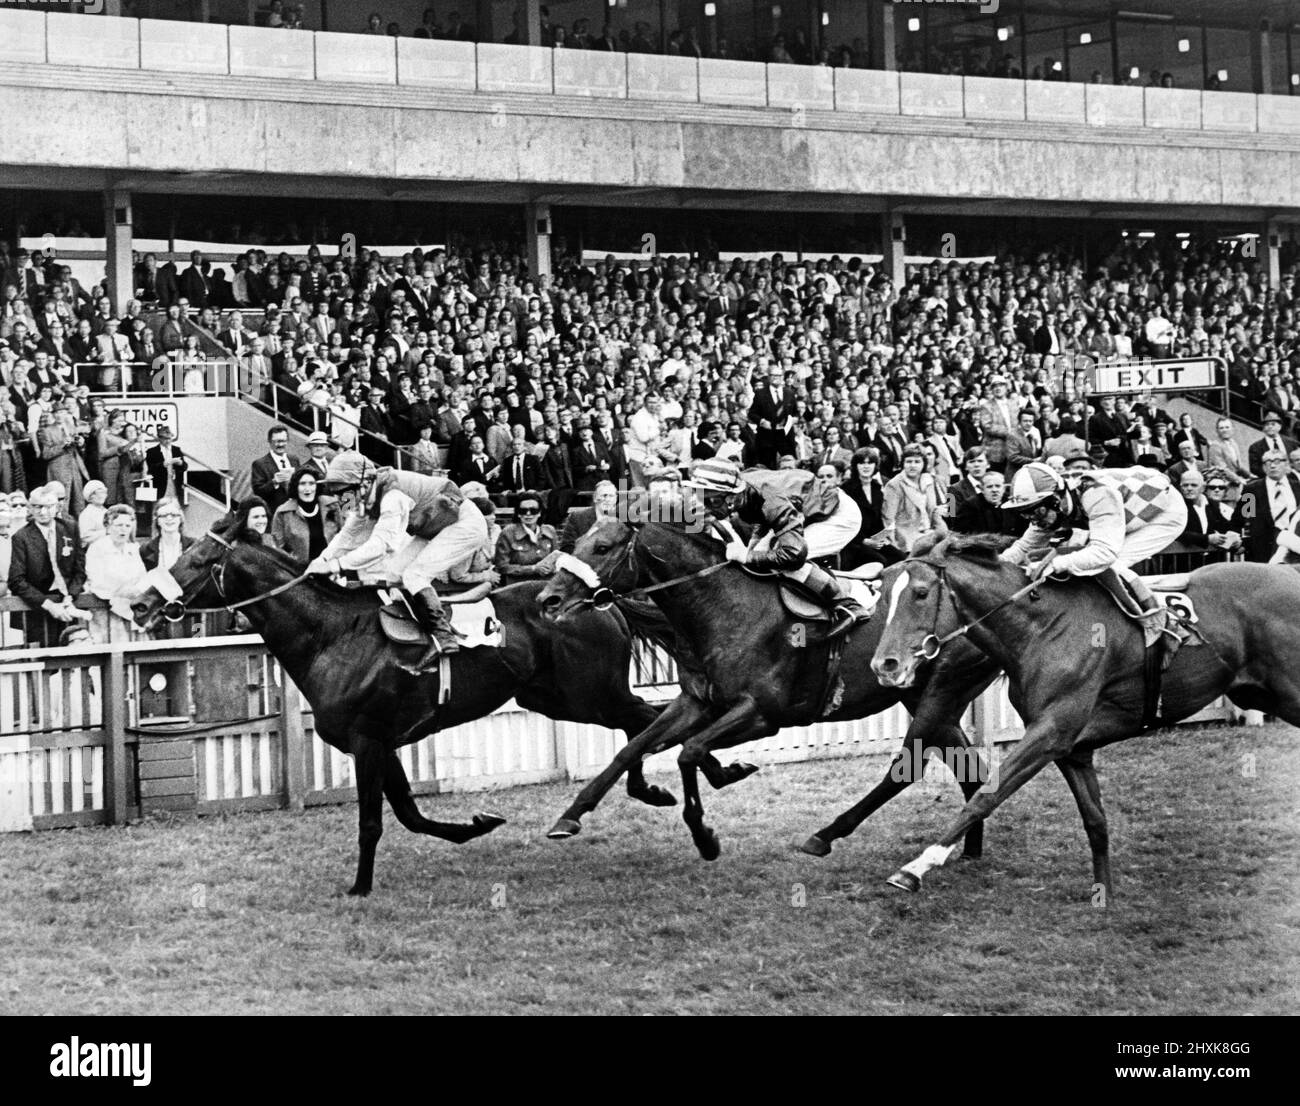 Redcar Racecourse is a thoroughbred horse racing venue located in Redcar, North Yorkshire. Claudio Nicolai wins the top race of the day, the William Hill Gold Cup at Redcar. Ardoon was second and Lord Helpus third. 6th August 1976. Stock Photo